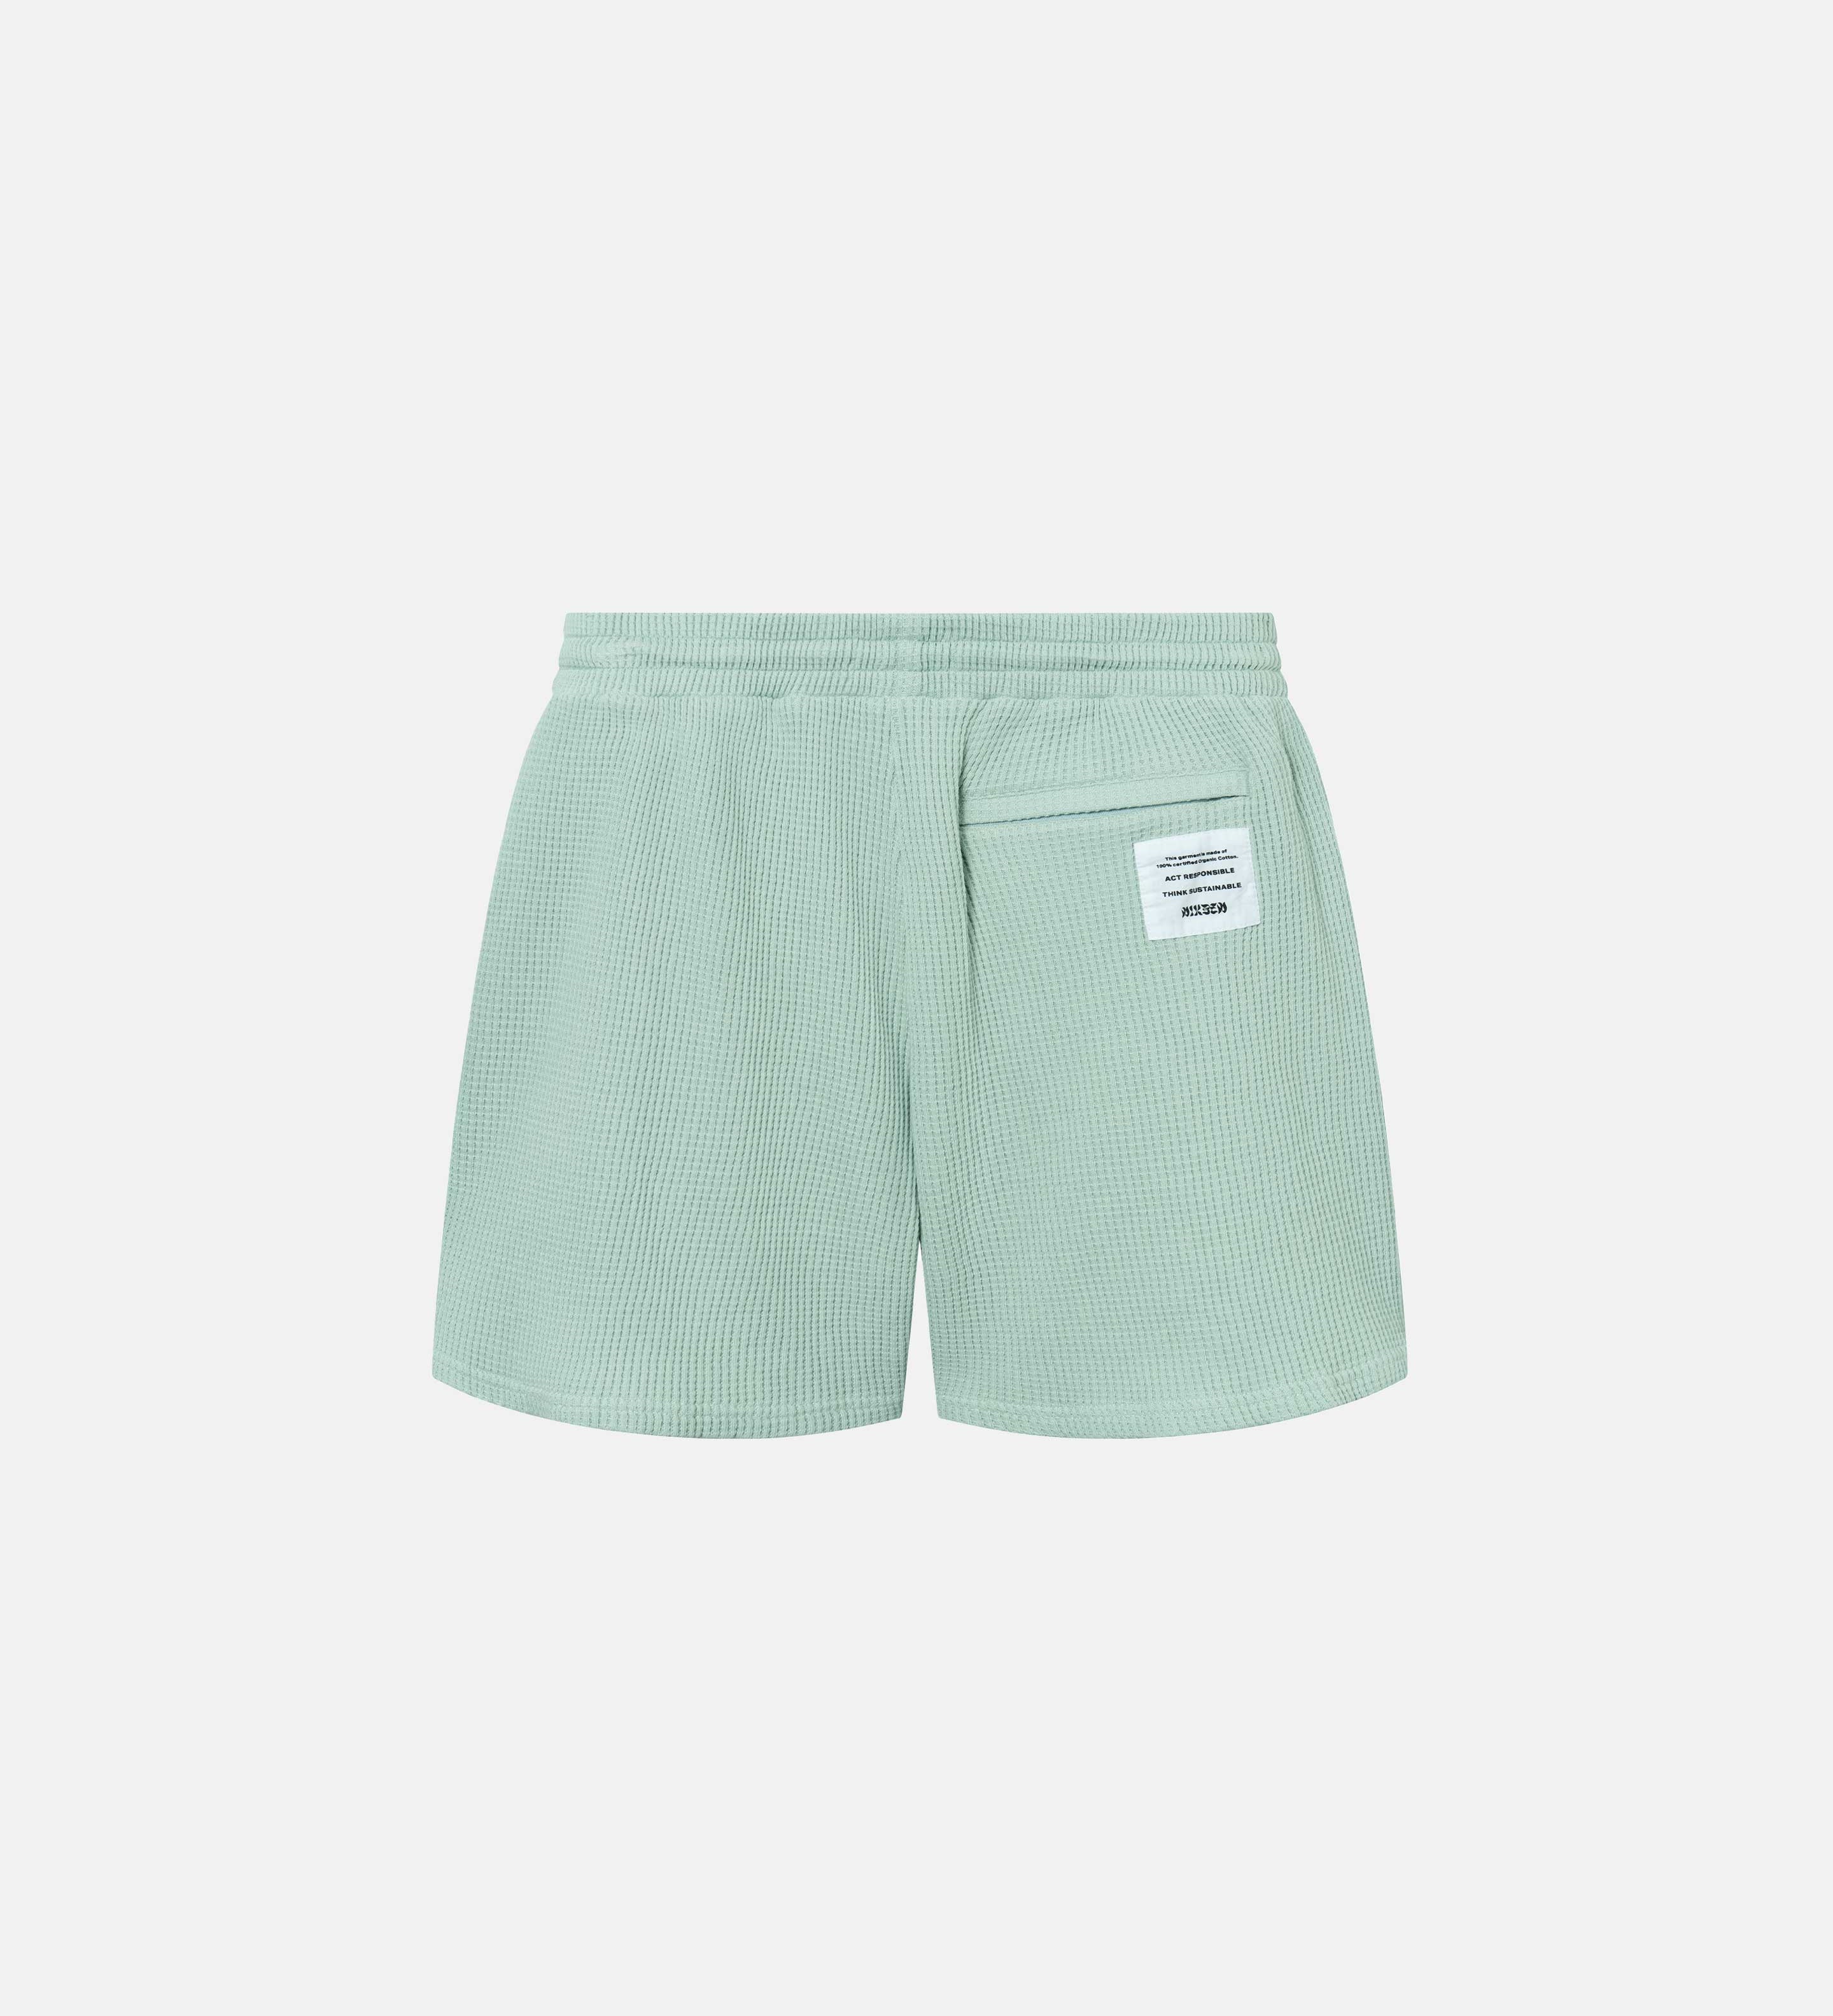 Backside of mint green waffle-patterned mid-length shorts with tone back pocket and logo patch.